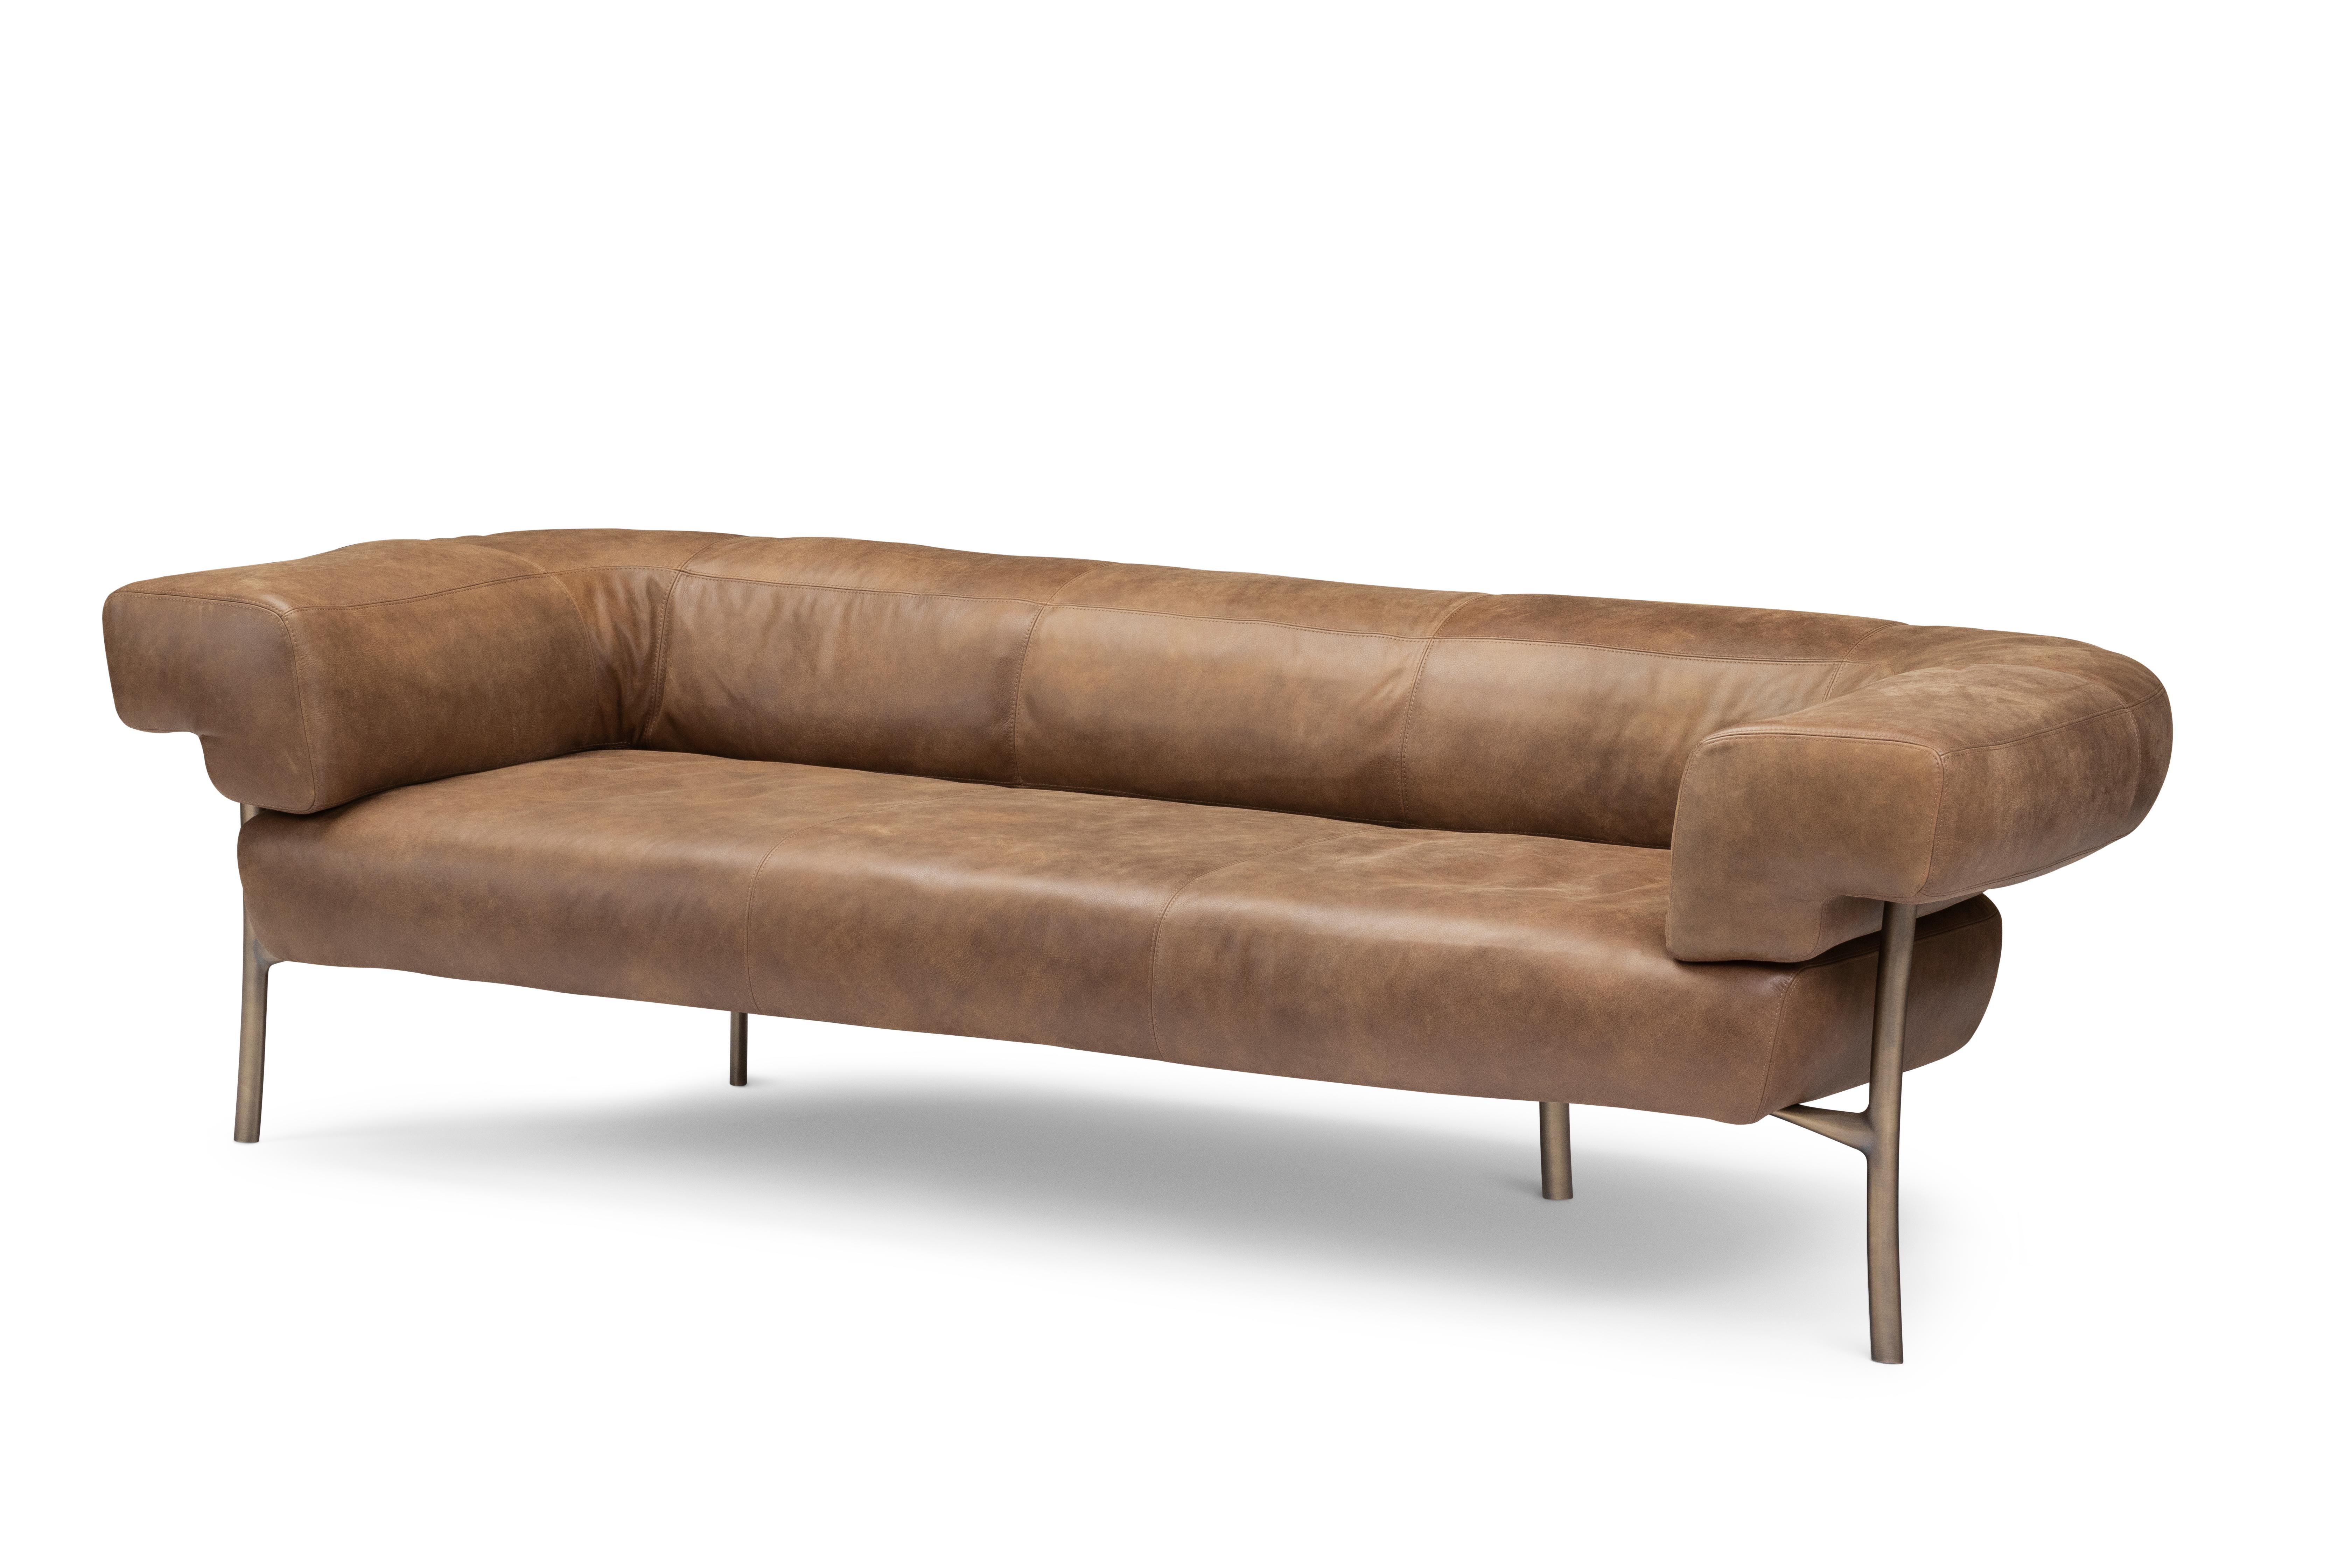 In the Katana sofa, Paolo Rizzatto, being the refined and expert designer he is, puts great care in the proportions of the structural elements of the product. In the elliptical leg, every millimeter has been designed and calibrated, as well as the